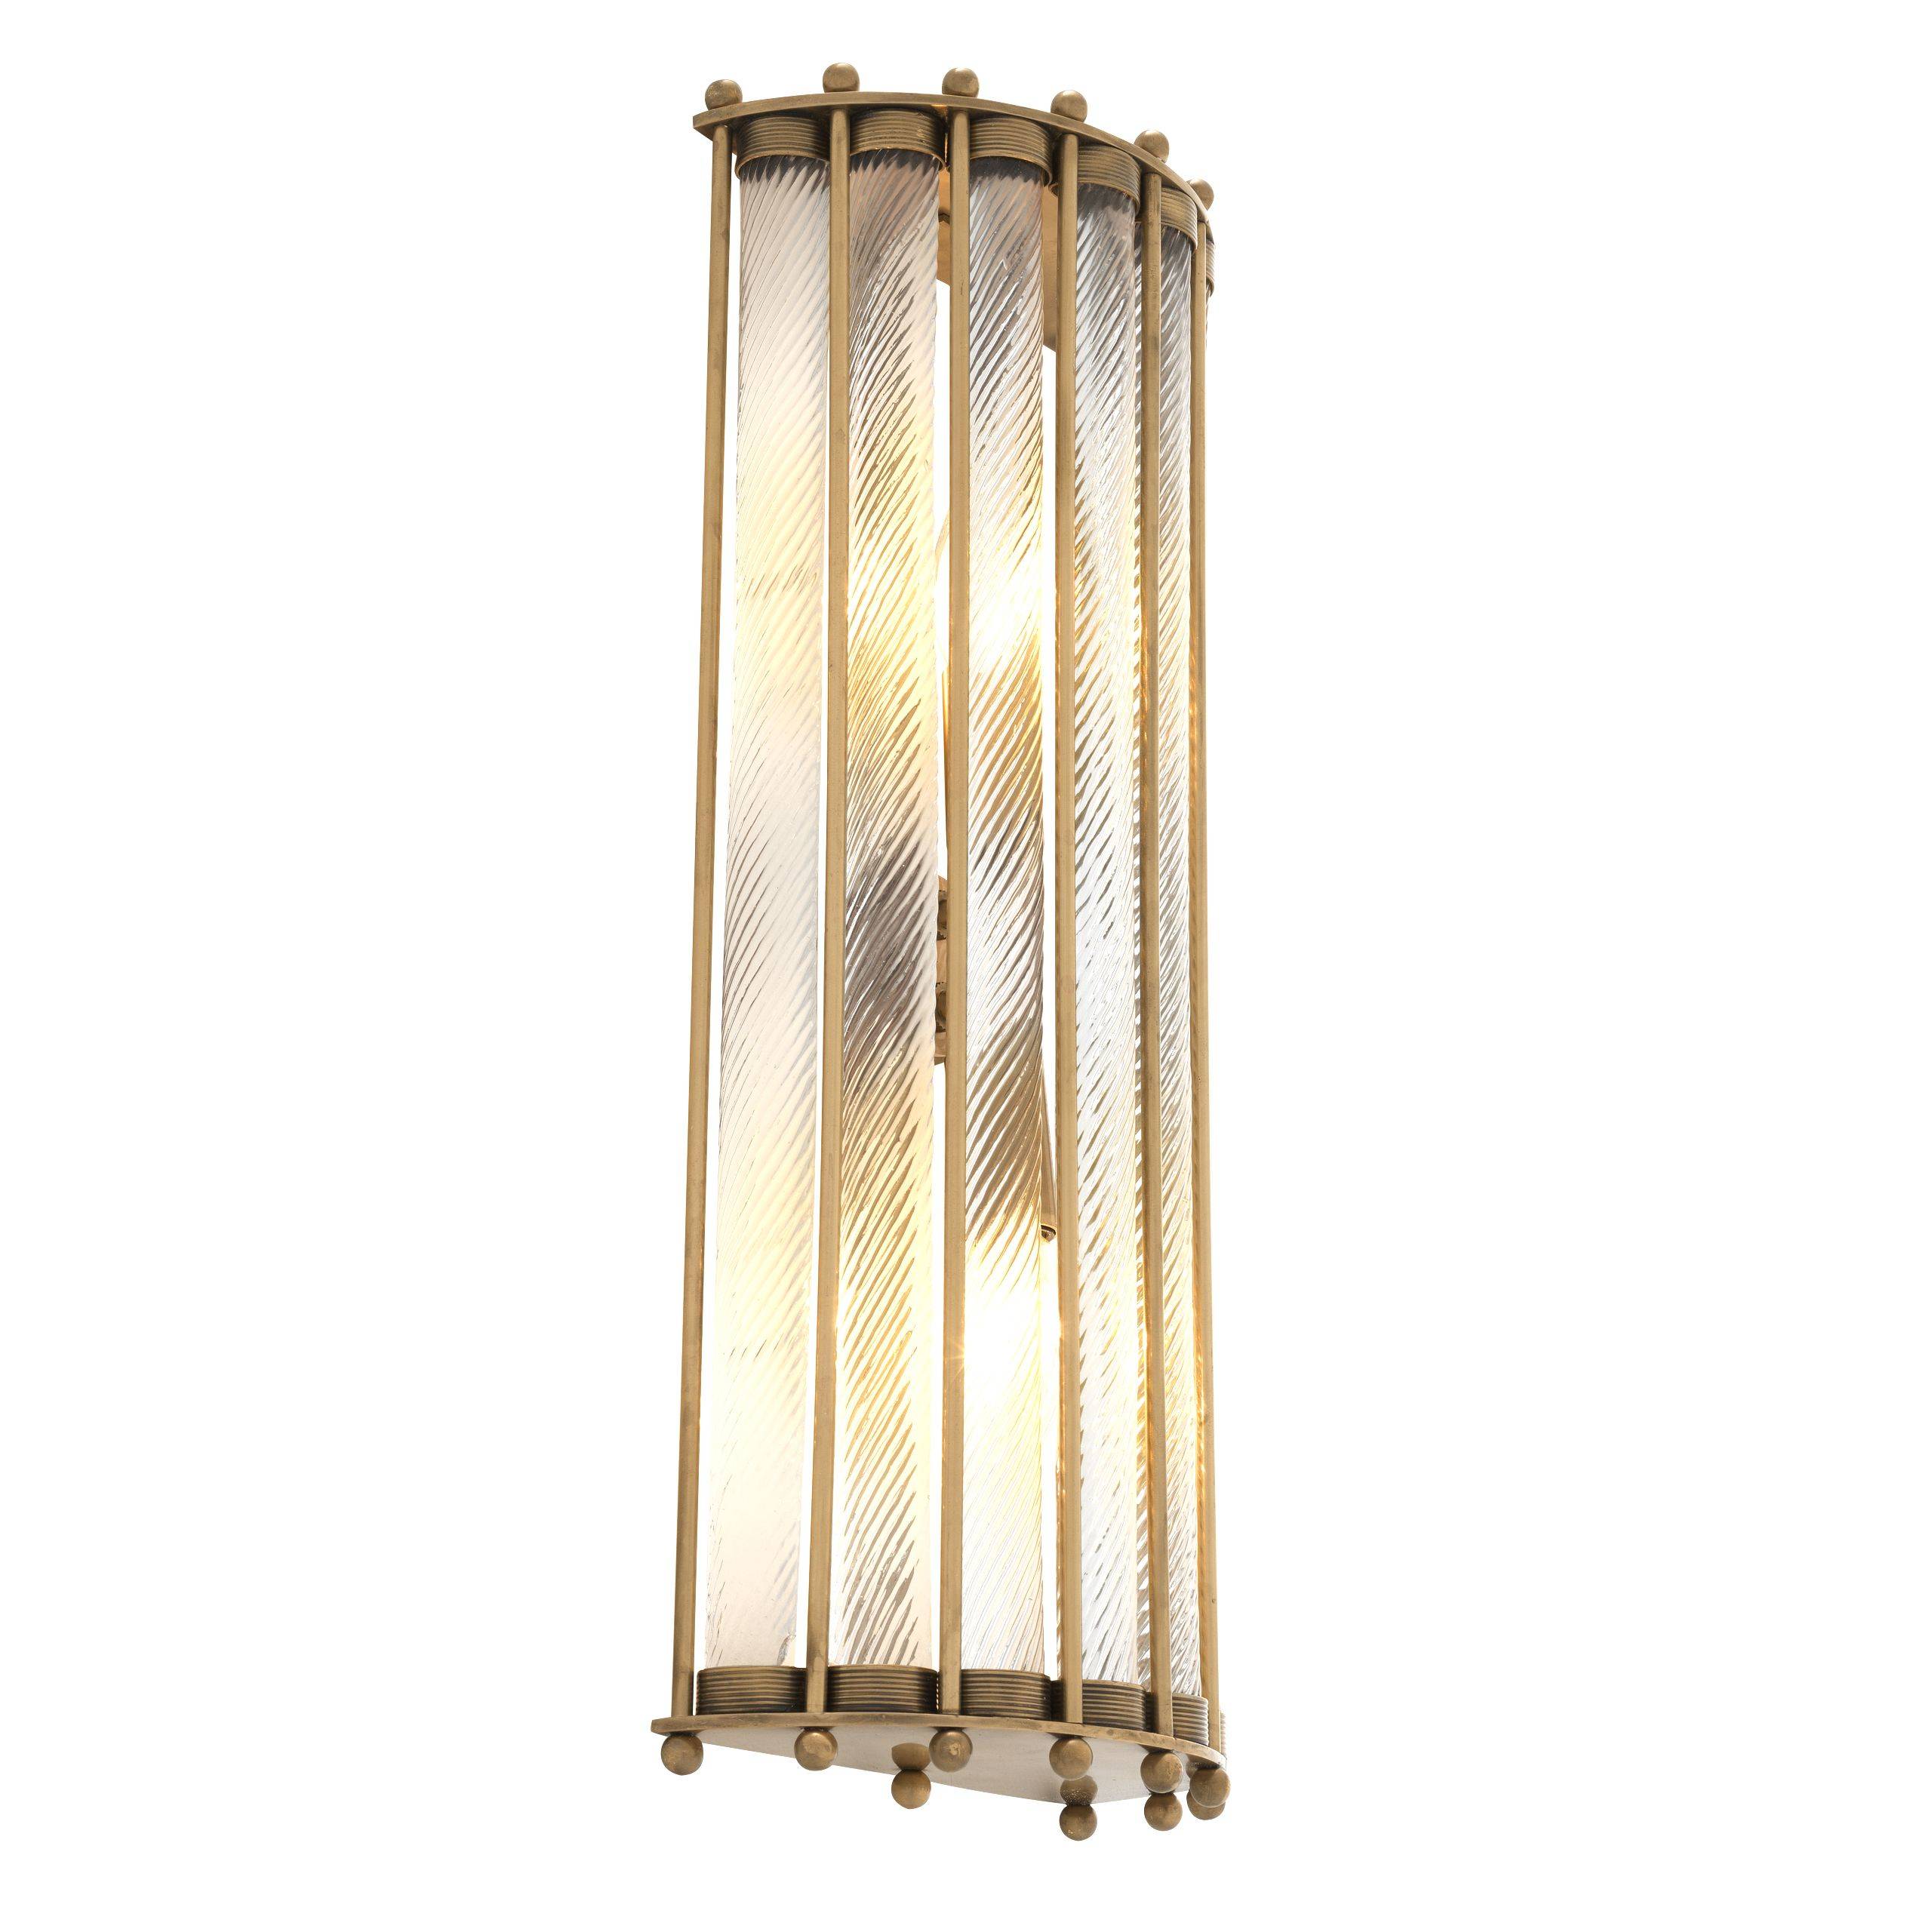 Tiziano Wall Lamps[S/L] - [Brass] - Eichholtz - Luxury Lighting Boutique